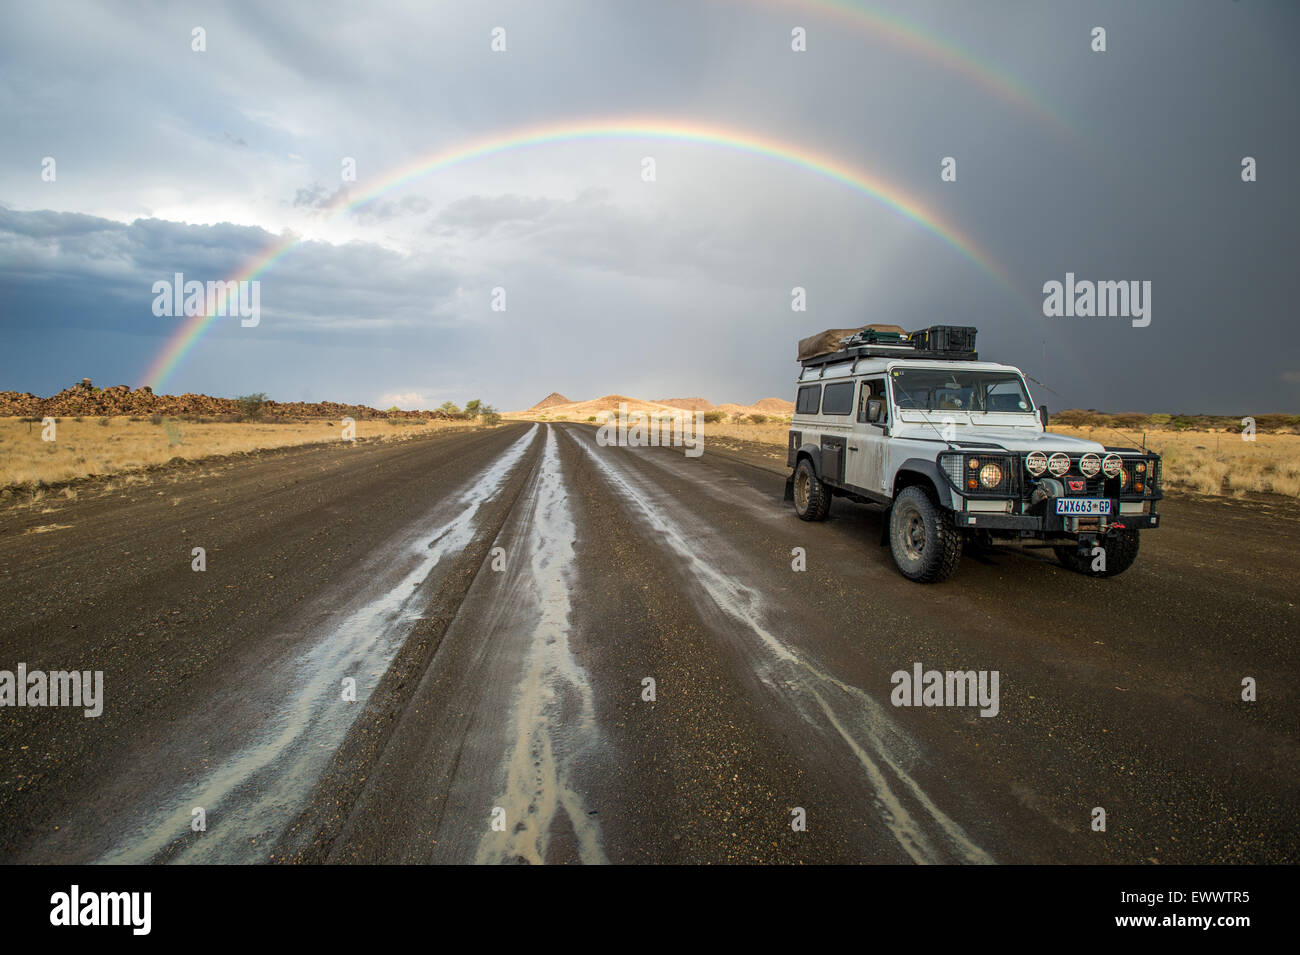 Keetmanshoop, Namibia, Africa - Land Rover driving down wet road with rainbow arching in the sky behind it Stock Photo